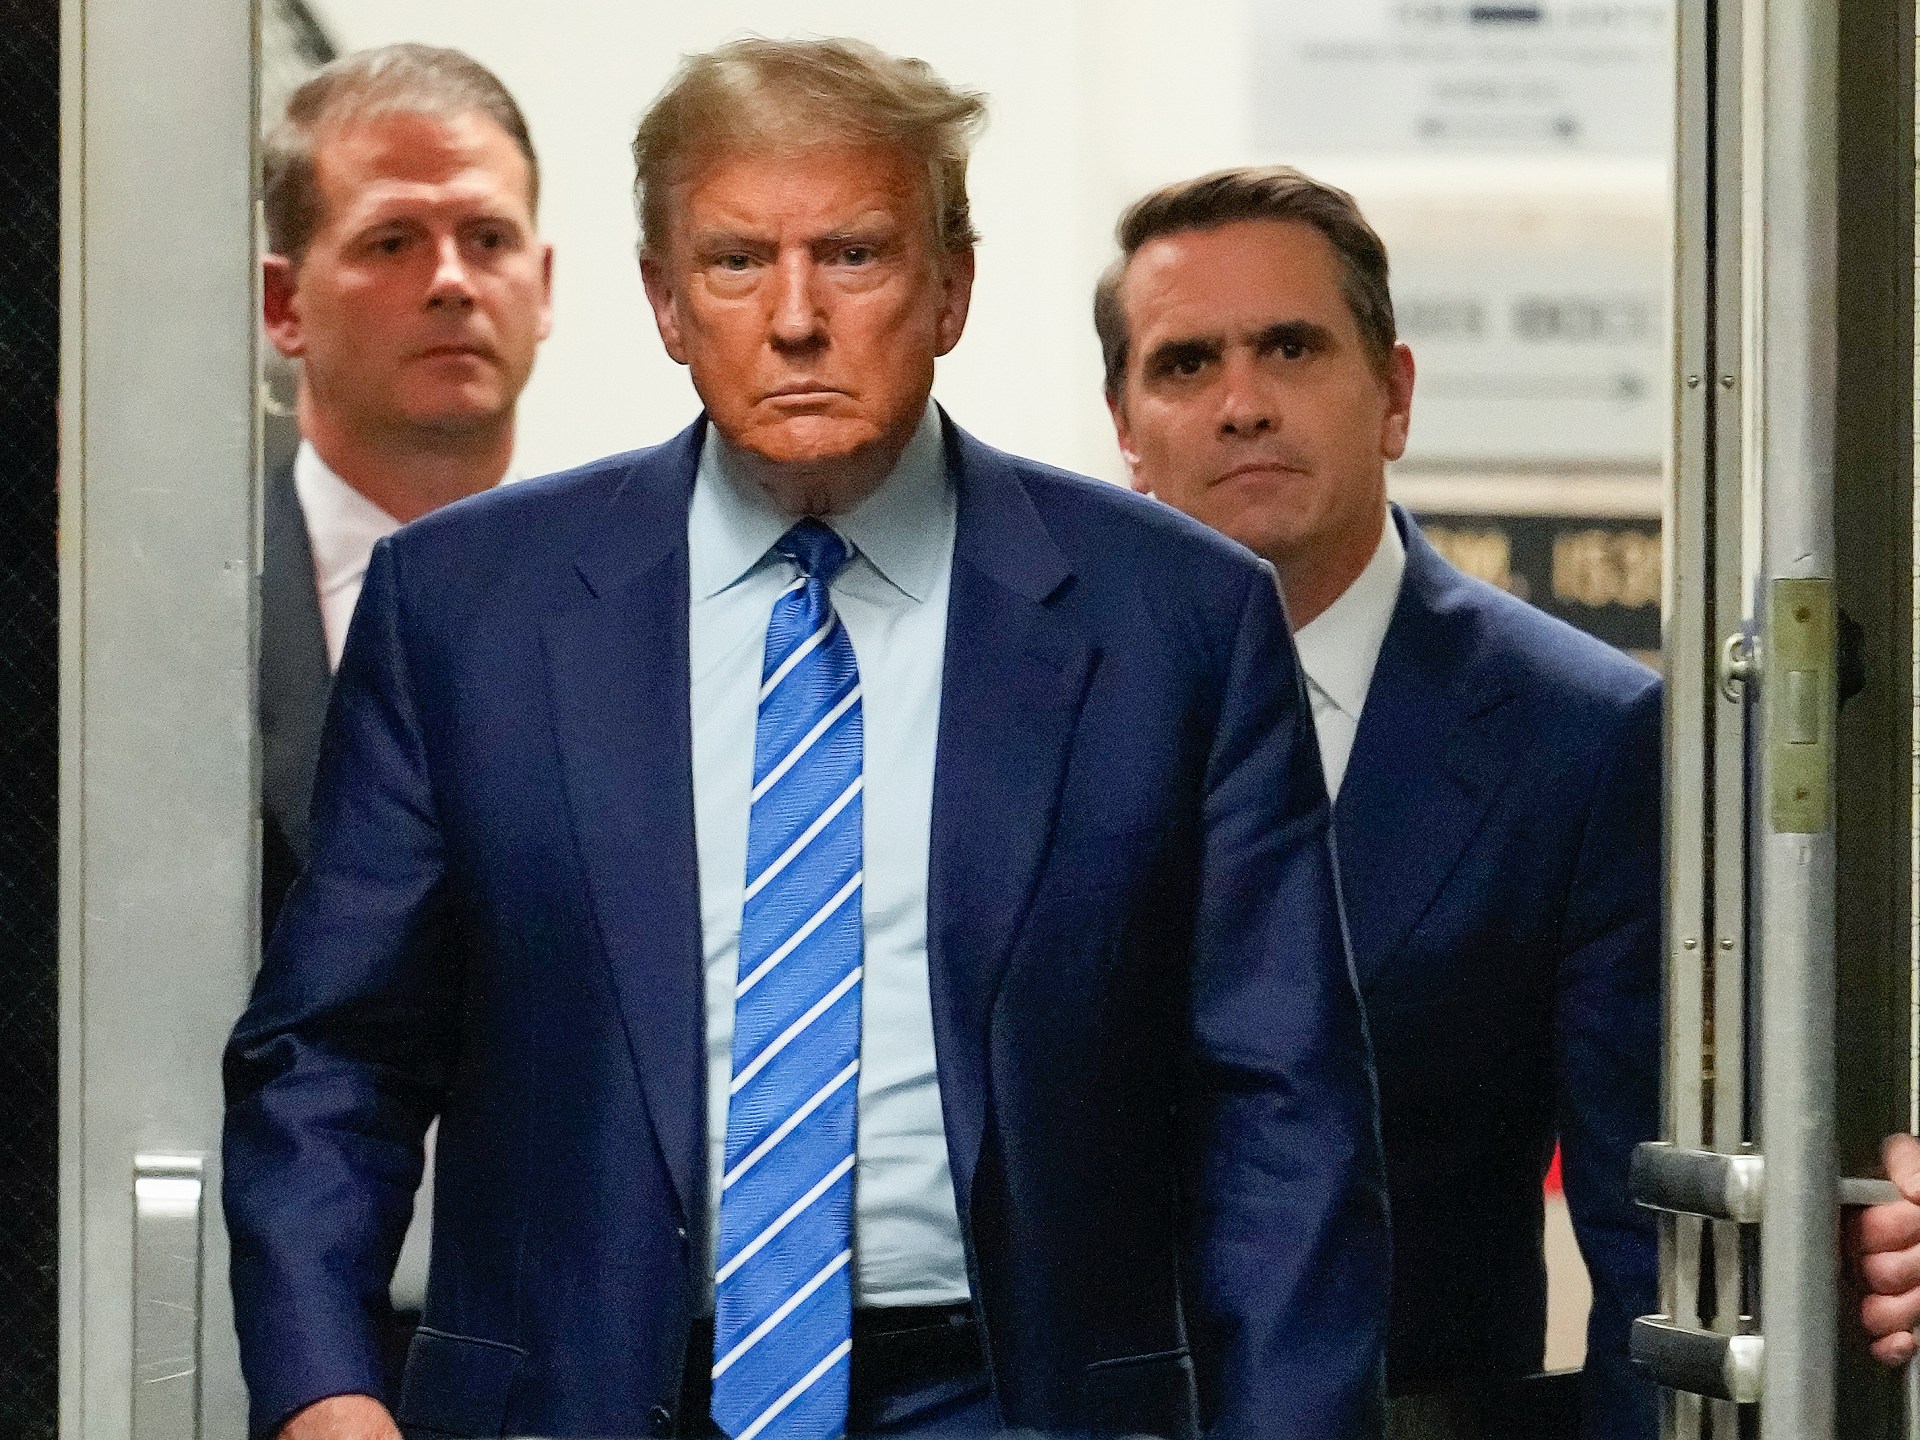 Seven jurors seated on the second day of Trump’s New York hush-money trial | Donald Trump Information